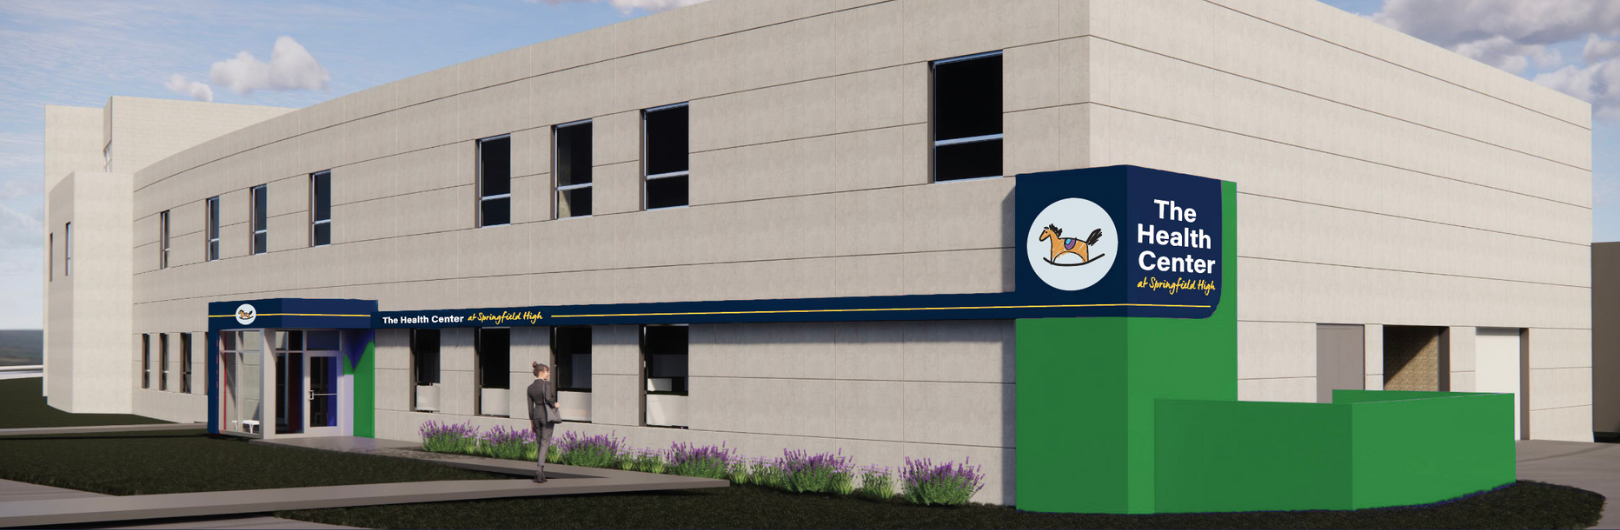 A rendering of the new School Based Health Center at Springfield High School